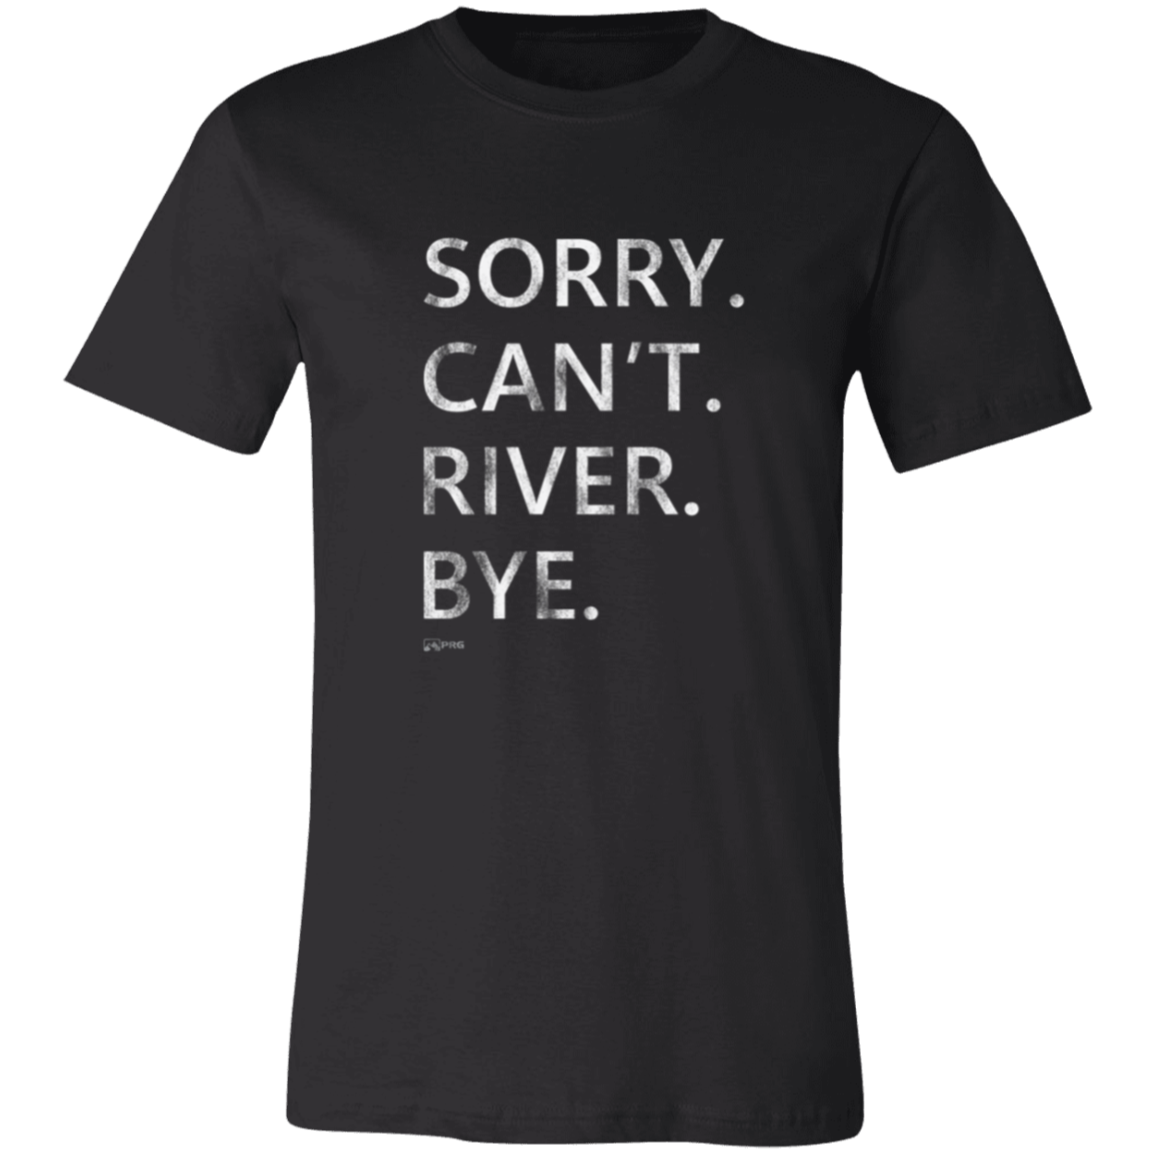 Sorry. Can't. River. Bye. - Shirt